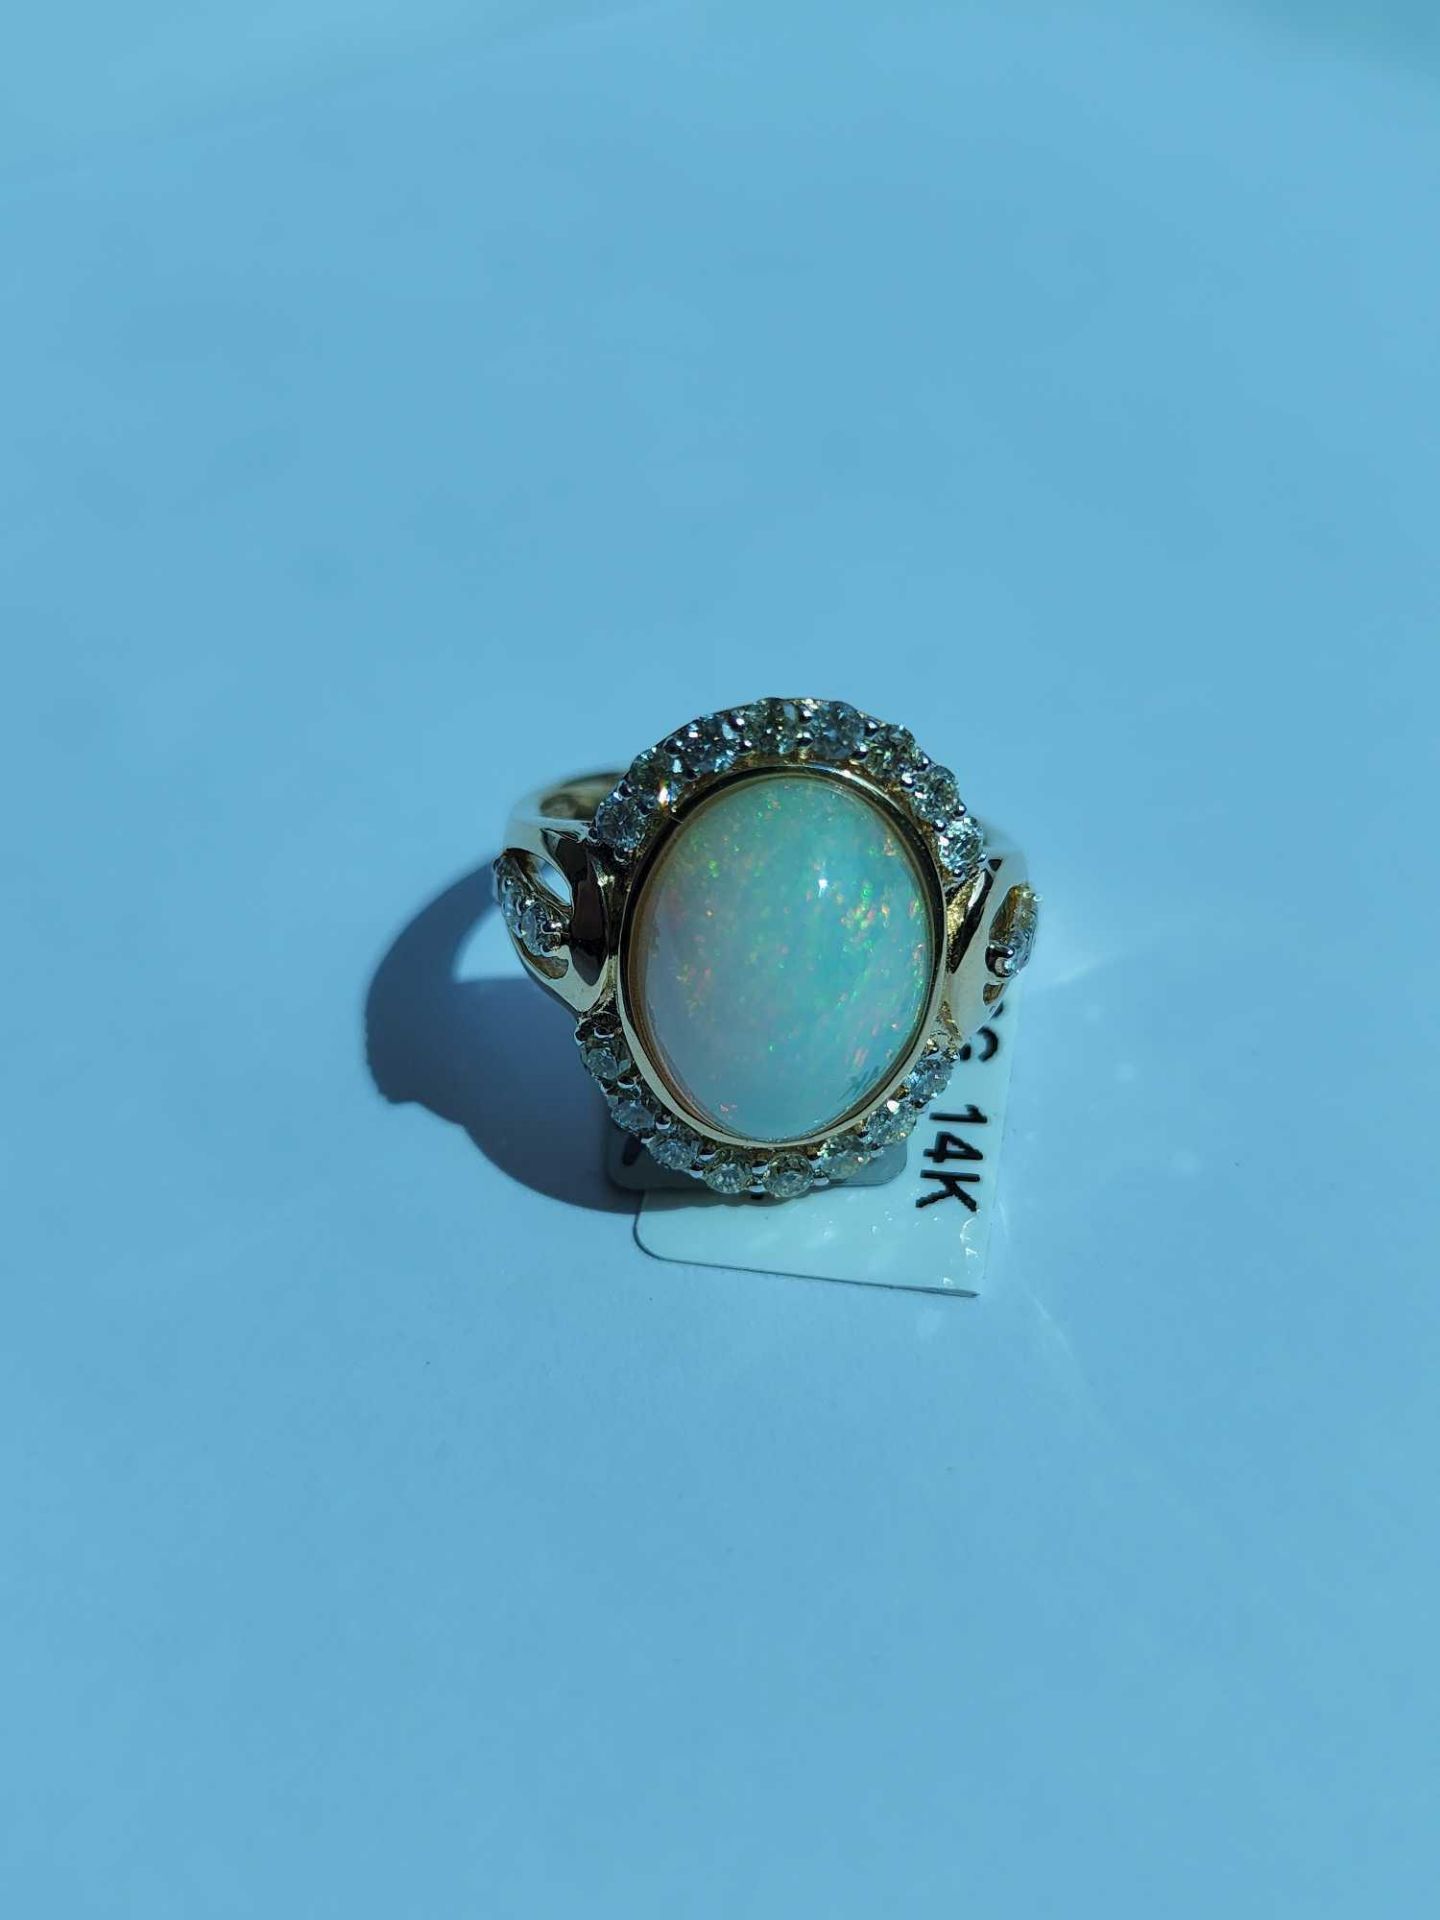 14K Yellow Gold Lady's Custome Made Diamond & Opal Ring 5.80 GR TW - Image 3 of 7